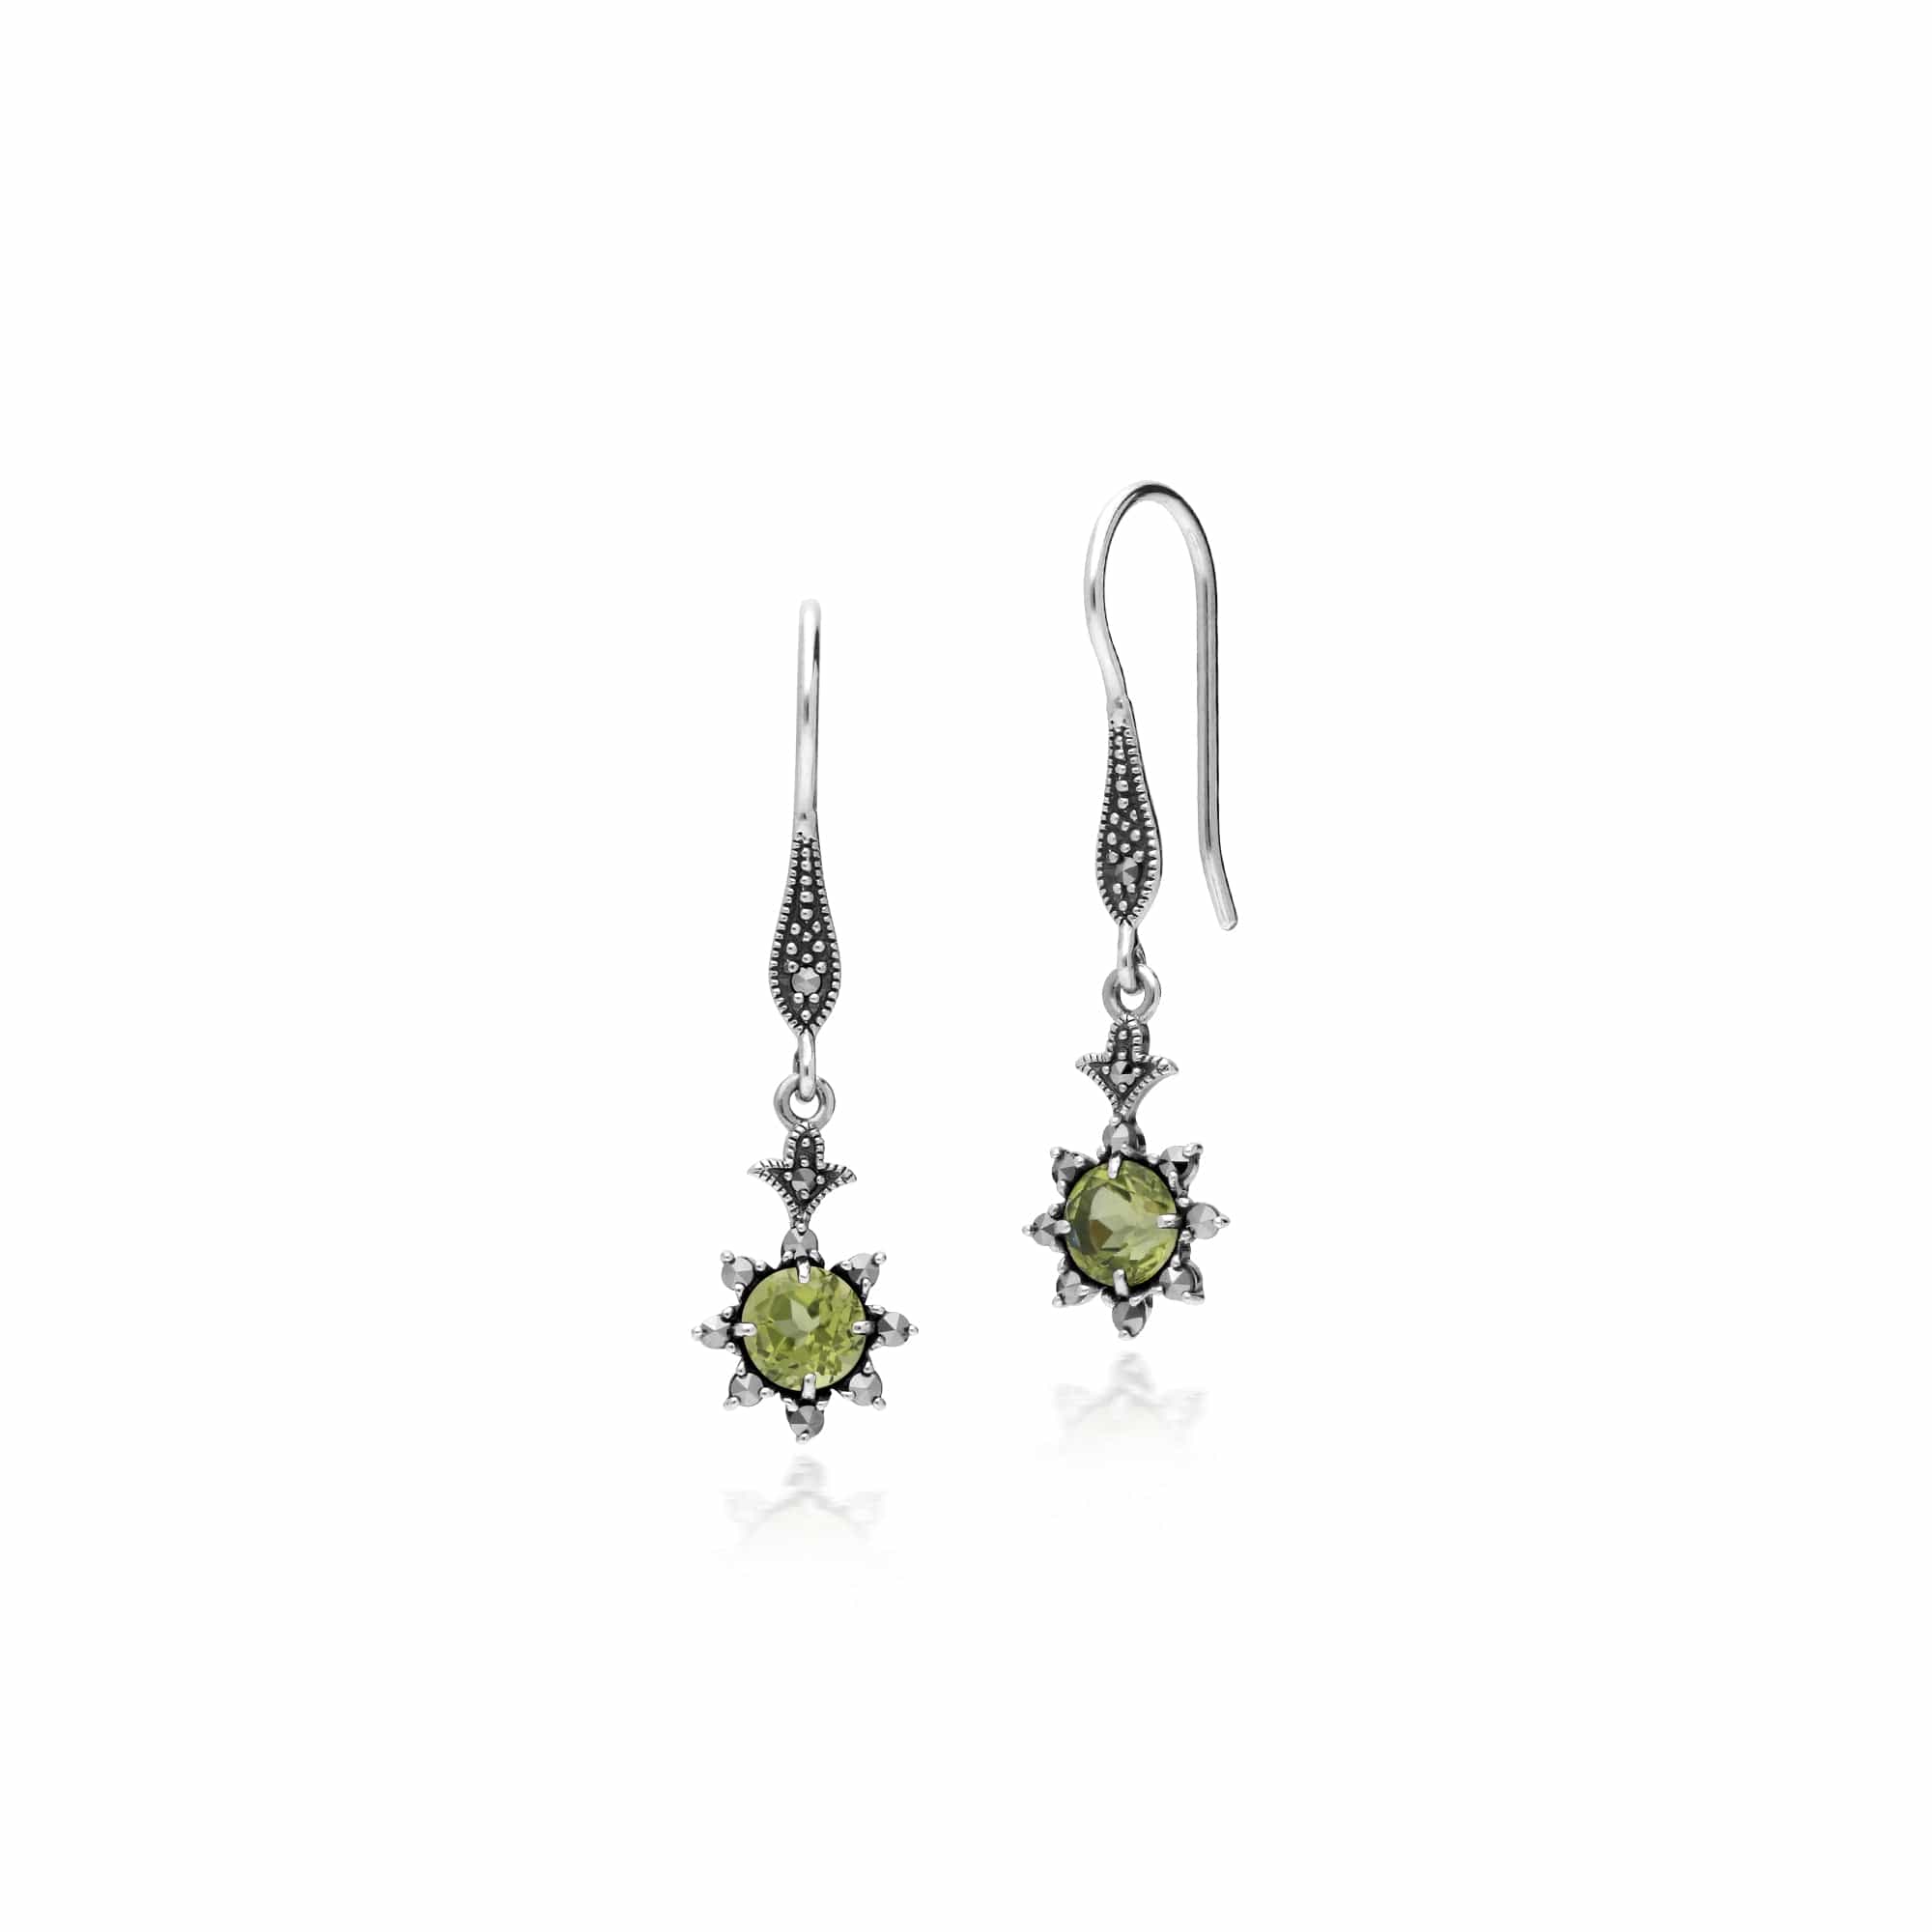 214E860604925 Floral Round Peridot & Marcasite Drop Earrings in 925 Sterling Silver 1